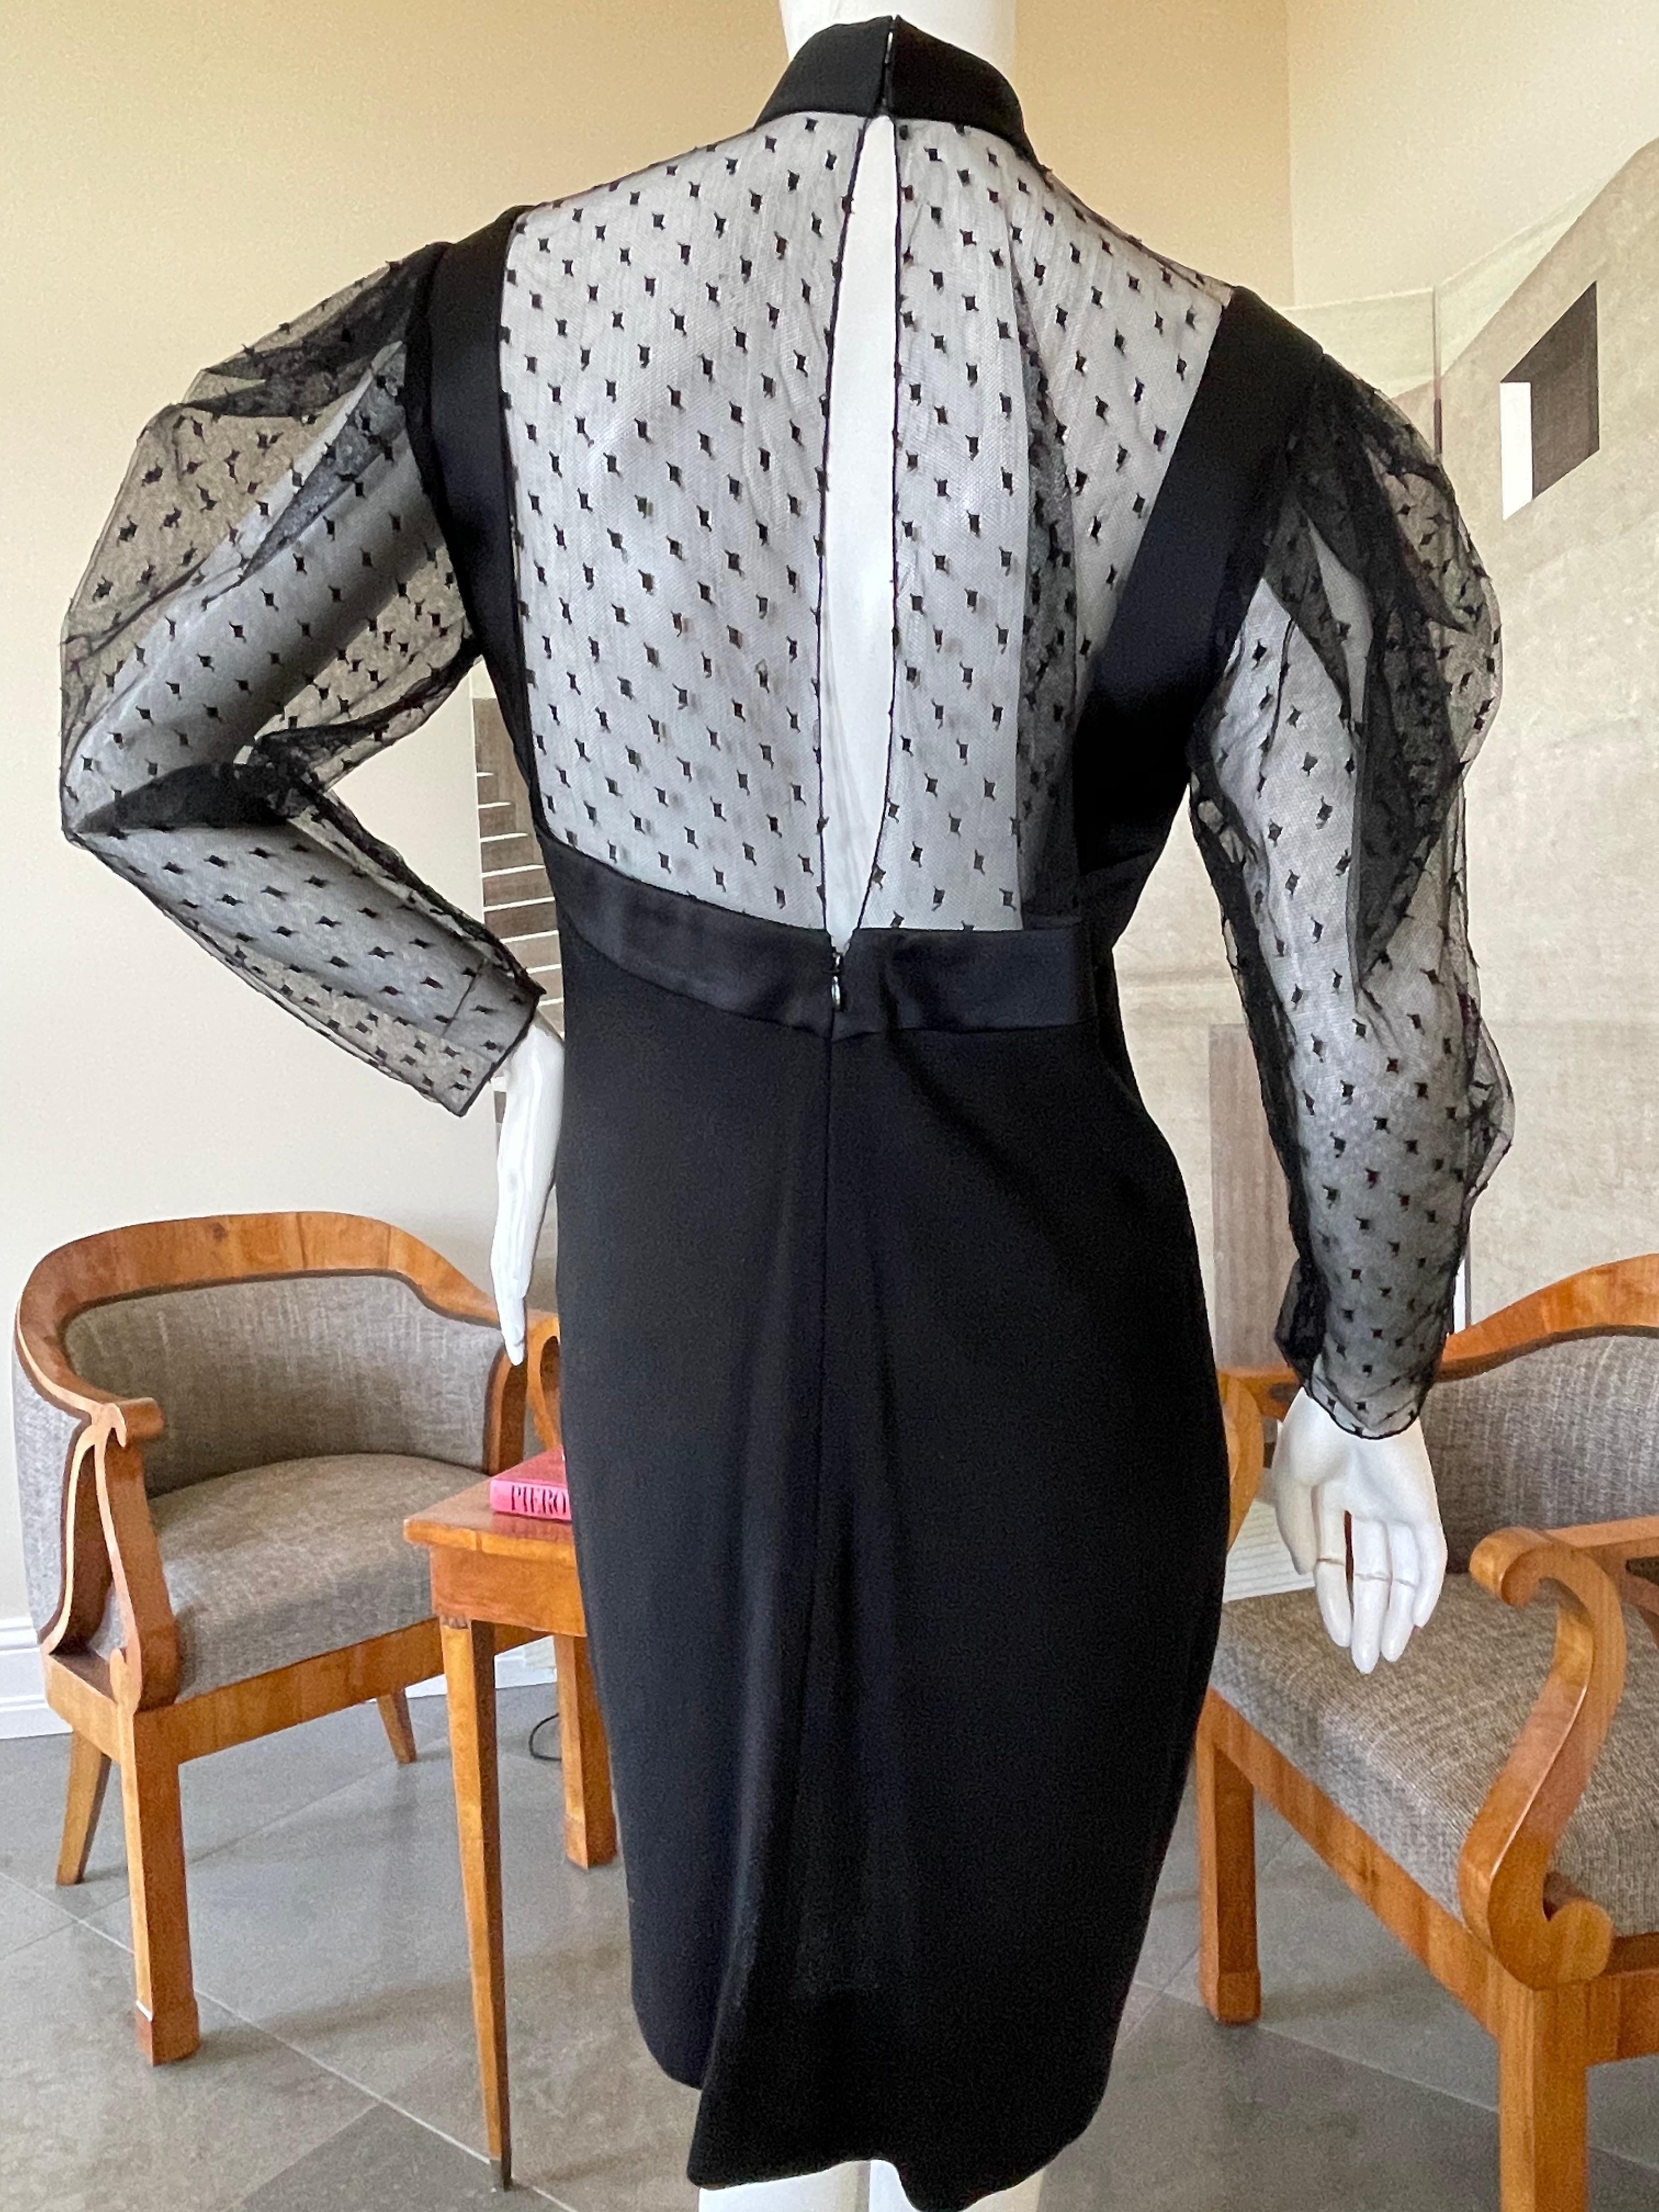 Givenchy Sheer Dot Dress w Bows by Clare Waight Keller New from Bergdorf Goodman 2